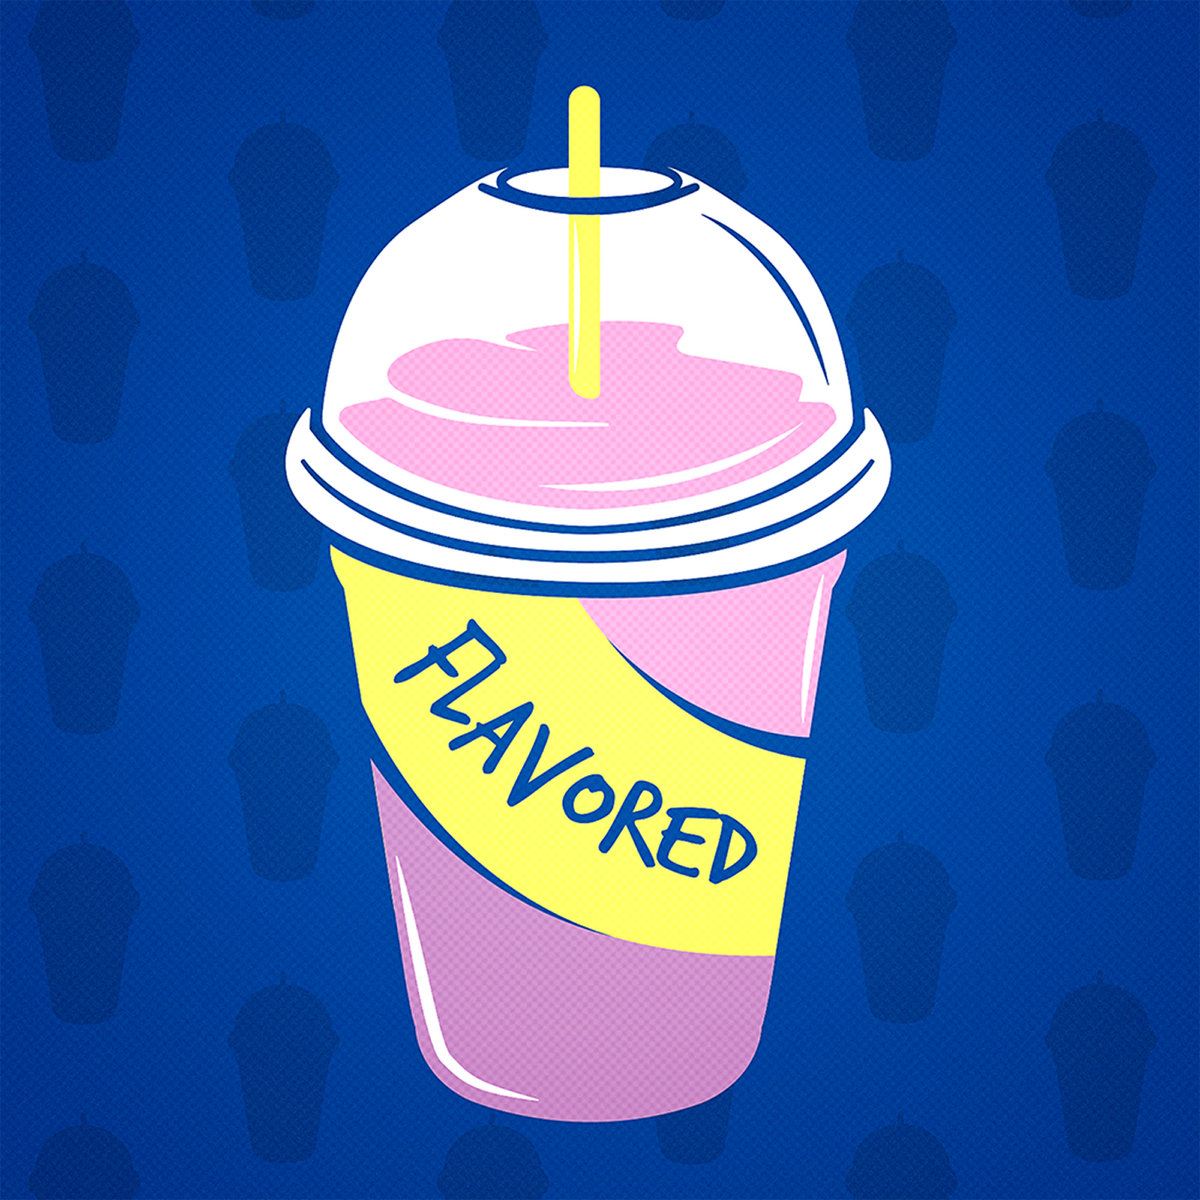 “Flavored” by Pop Up!